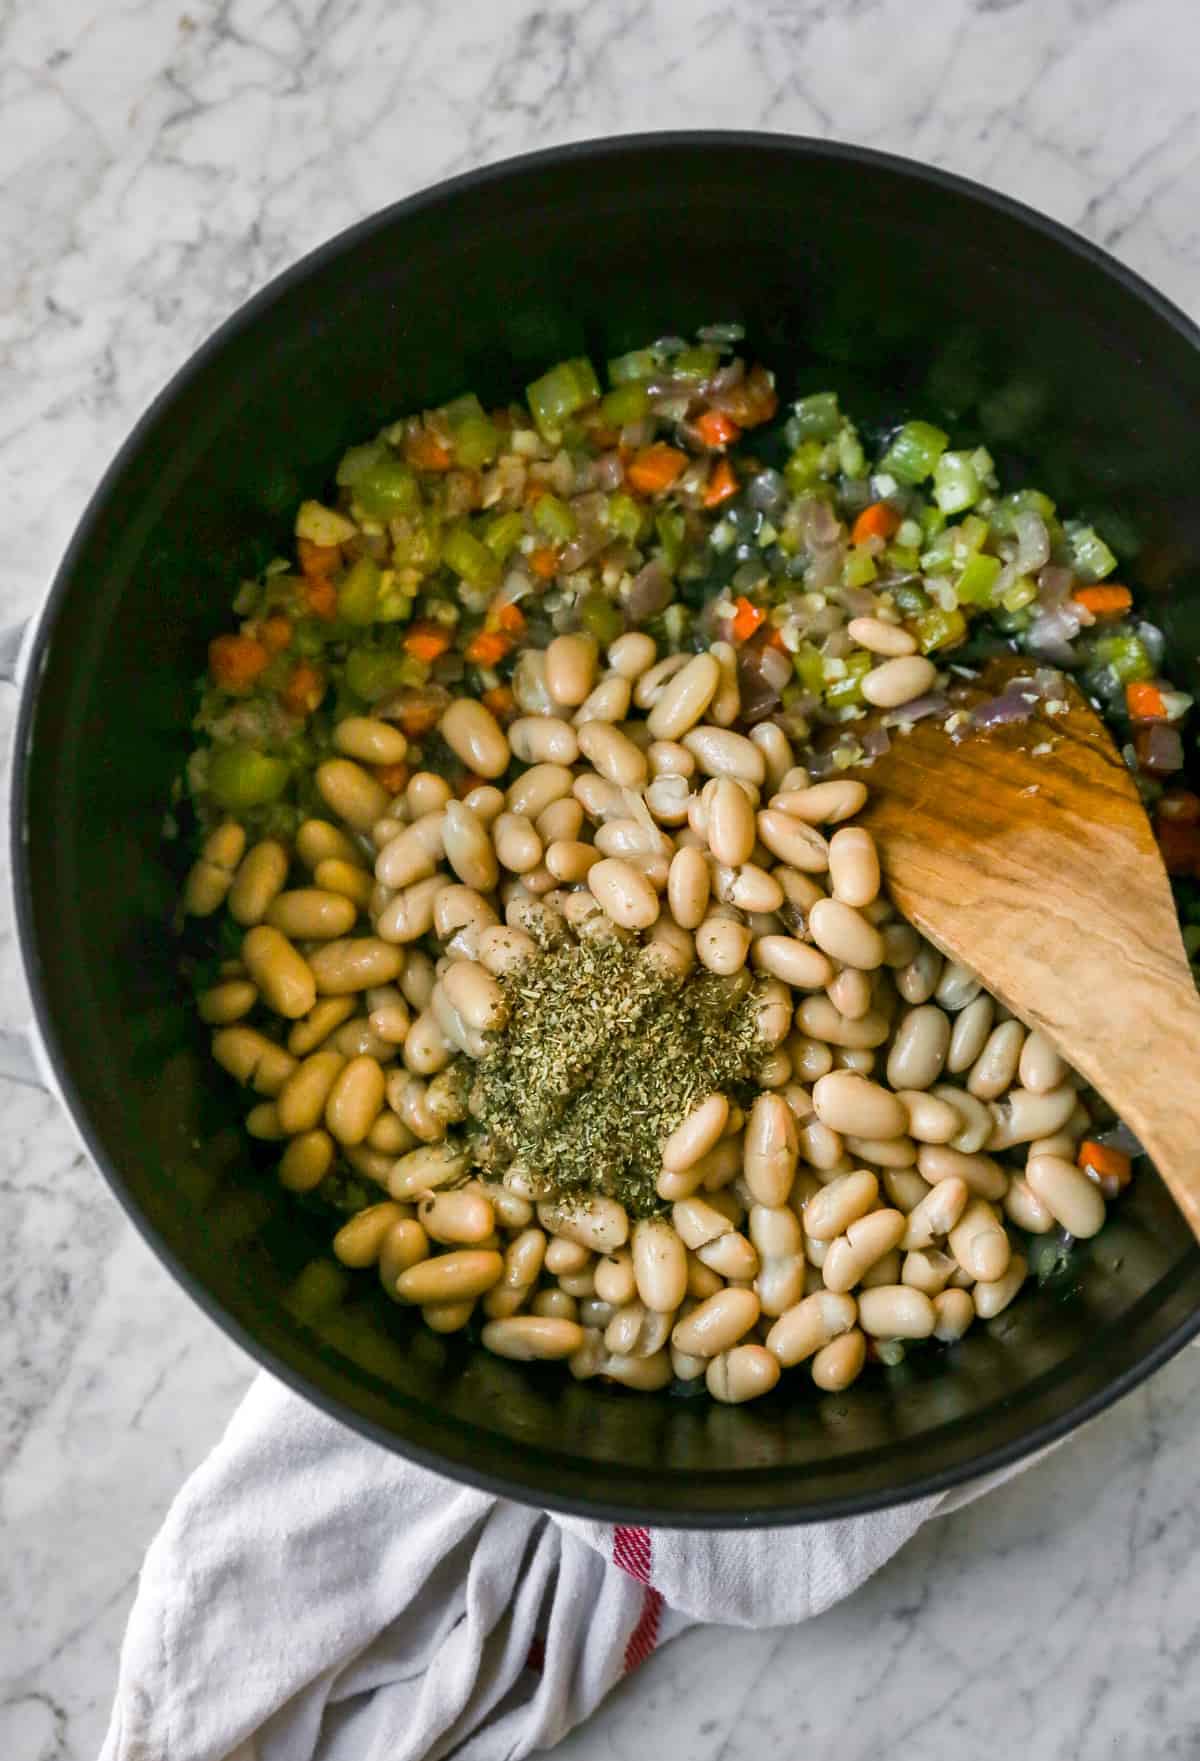 adding in seasonings and white bean into the mirepoix